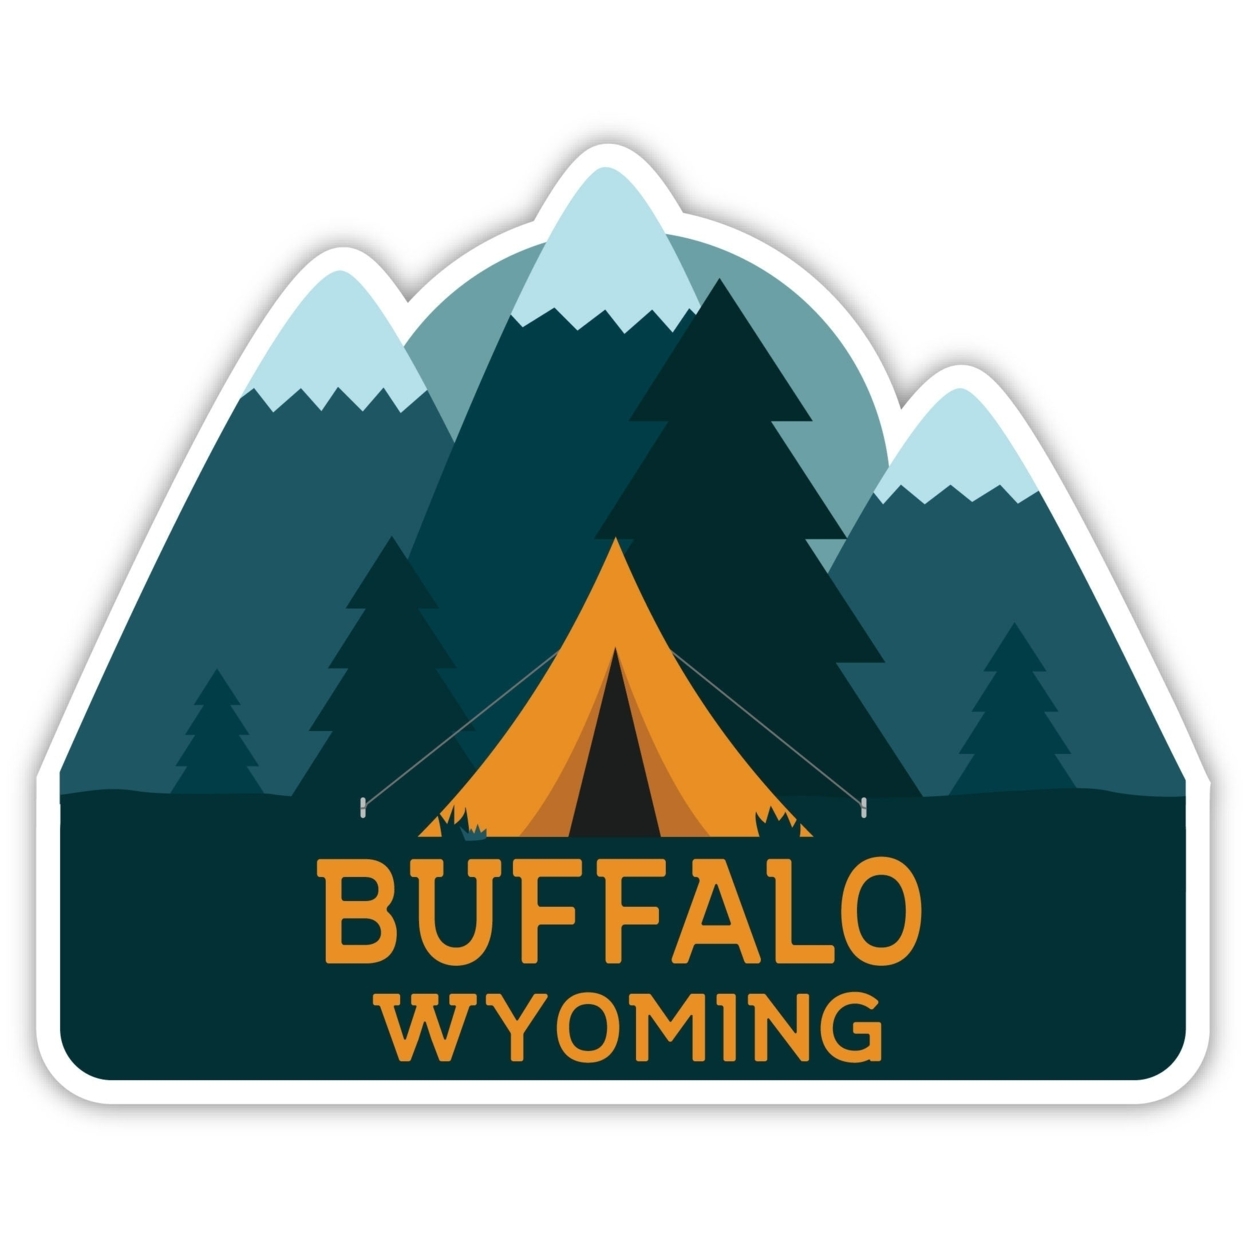 Buffalo Wyoming Souvenir Decorative Stickers (Choose Theme And Size) - 4-Pack, 4-Inch, Adventures Awaits